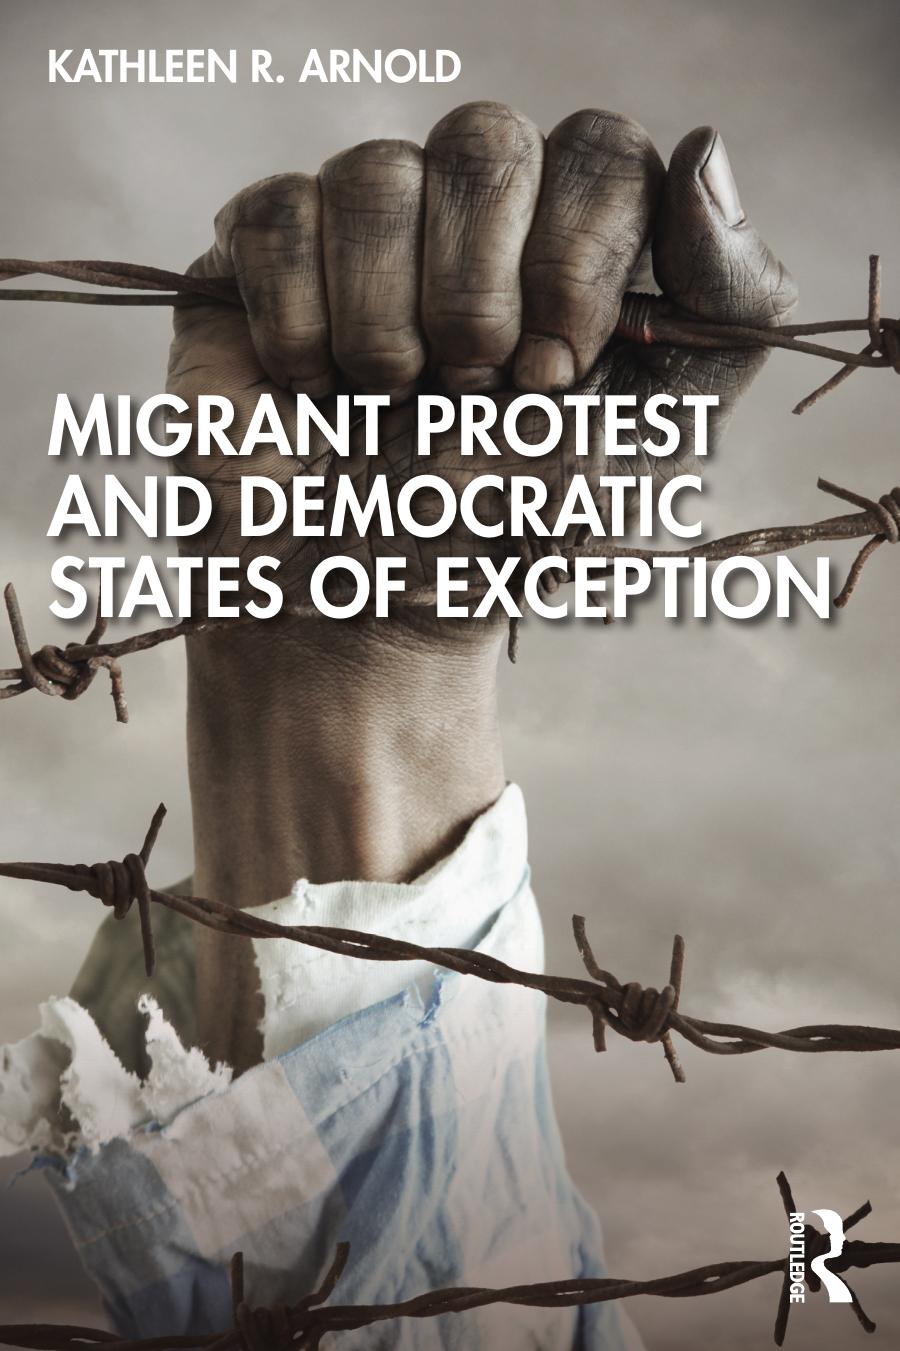 Migrant Protest and Democratic States of Exception by Kathleen R. Arnold